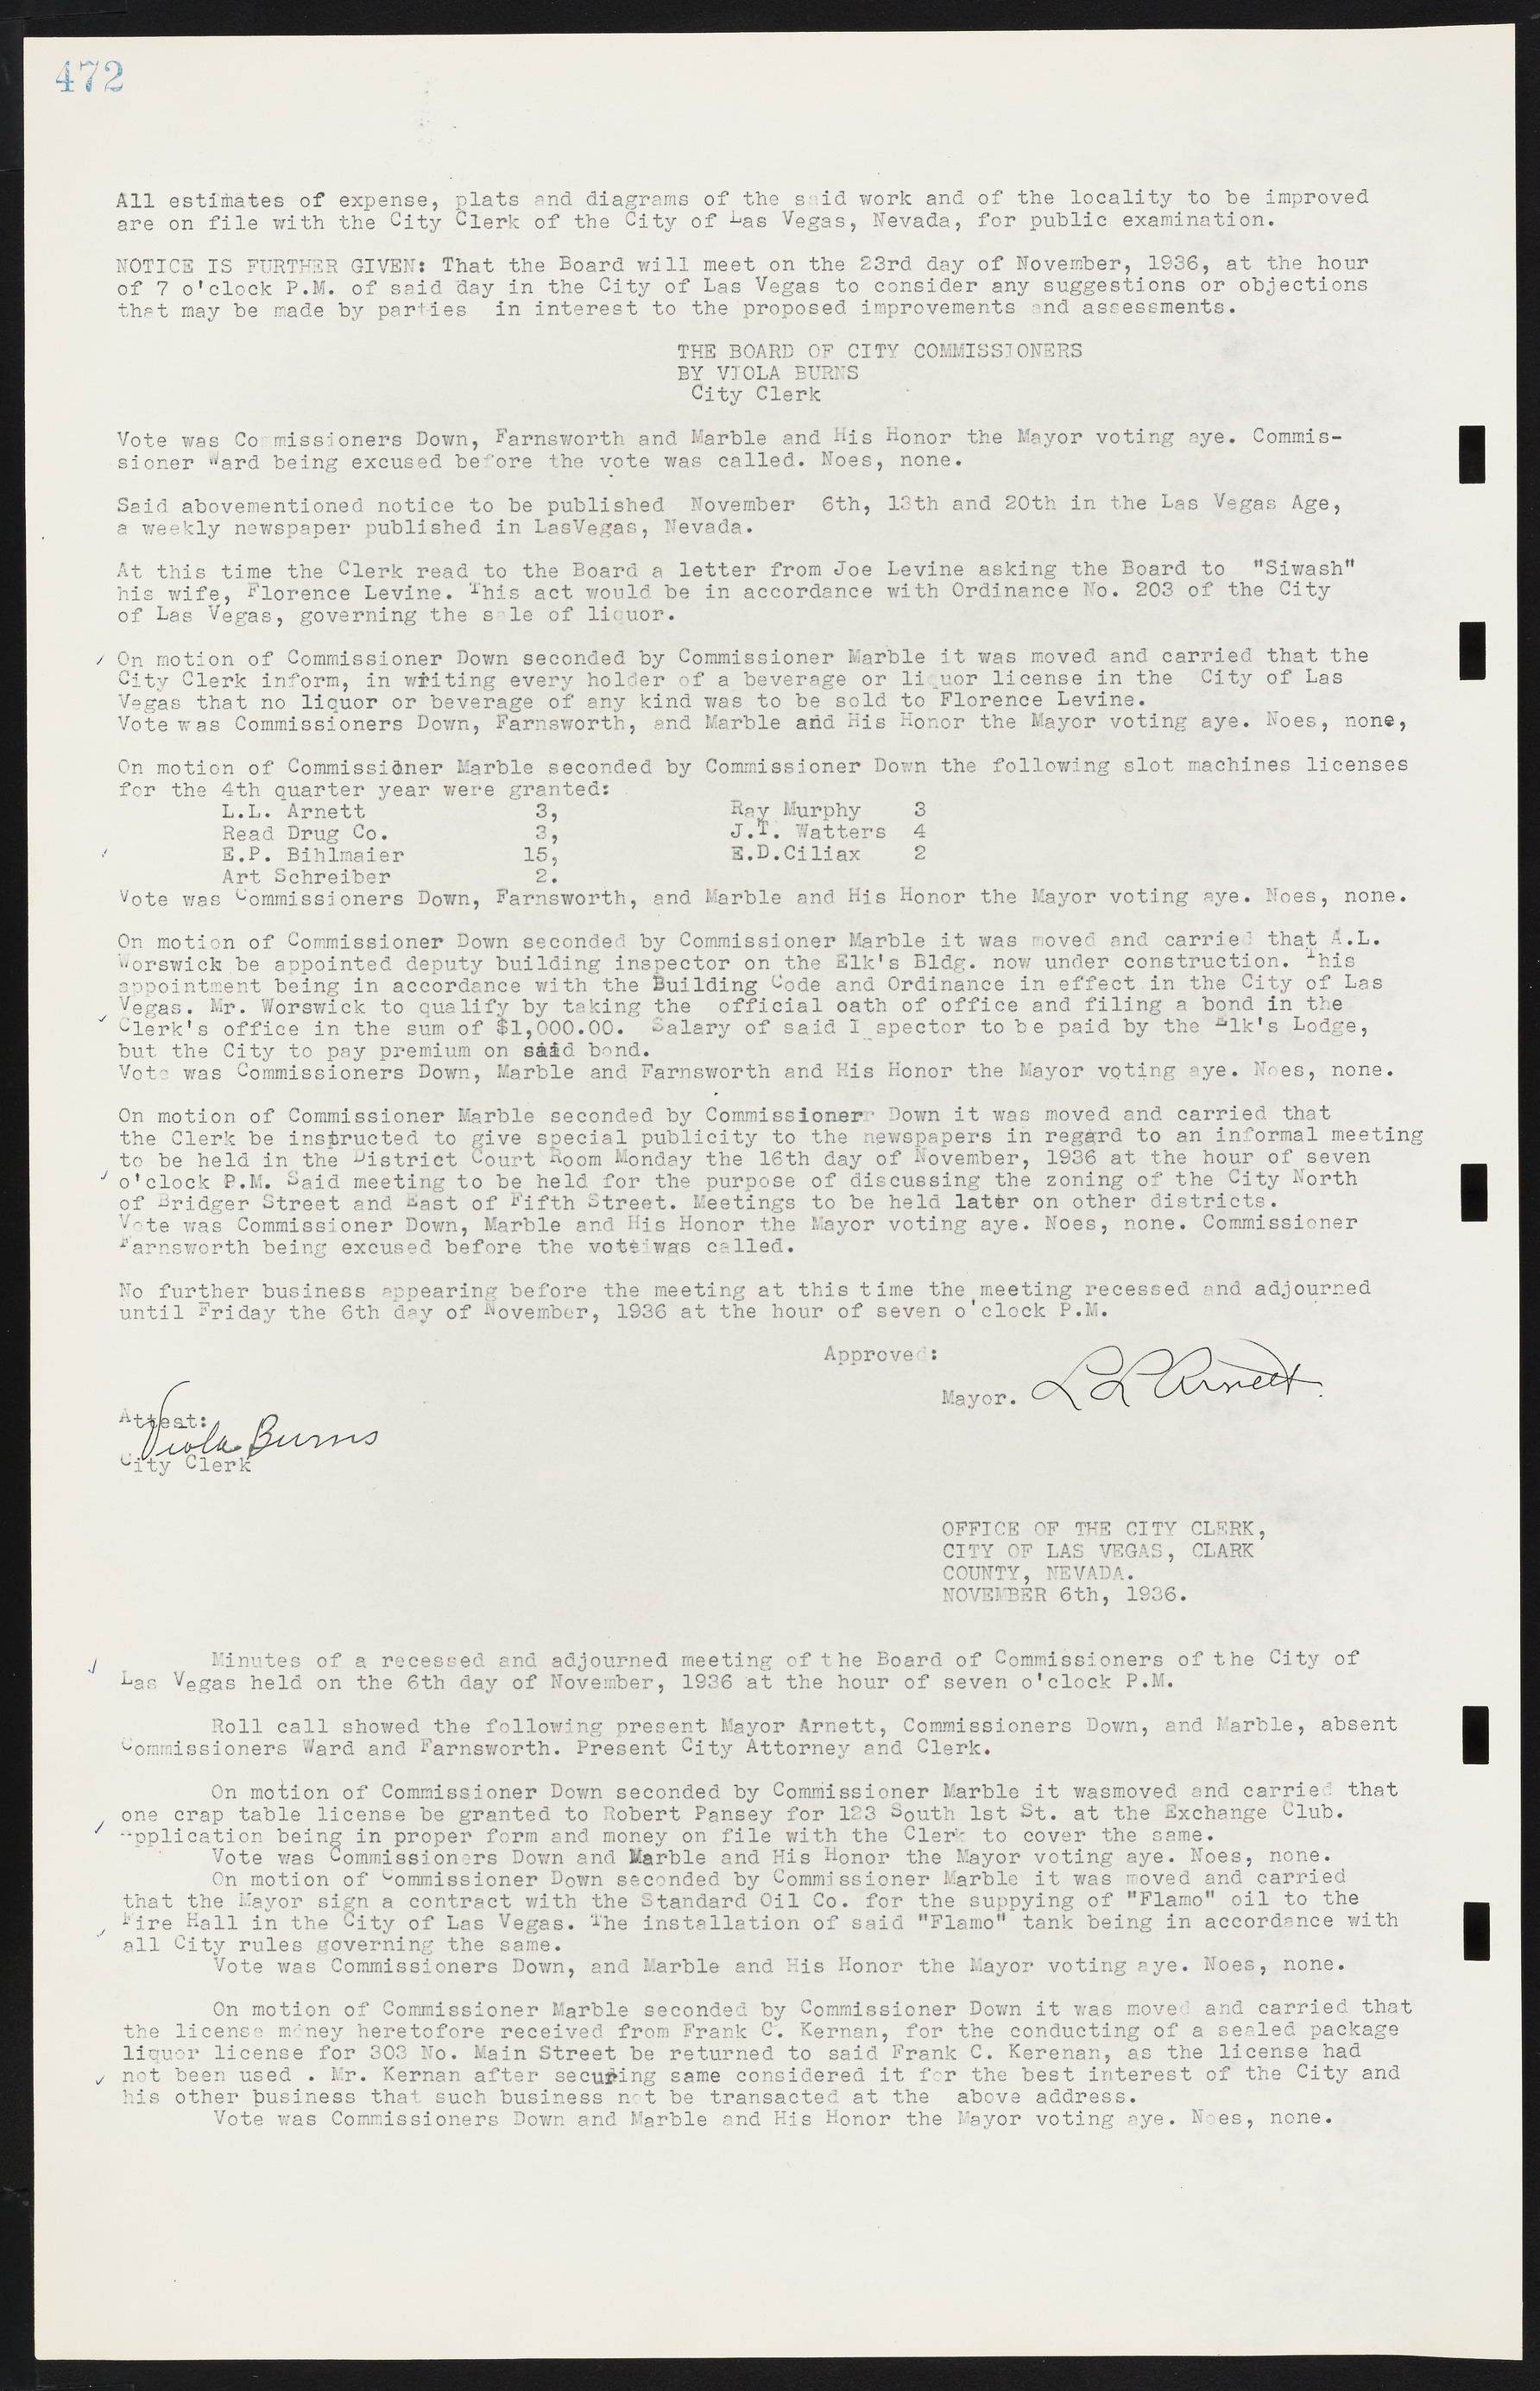 Las Vegas City Commission Minutes, May 14, 1929 to February 11, 1937, lvc000003-479